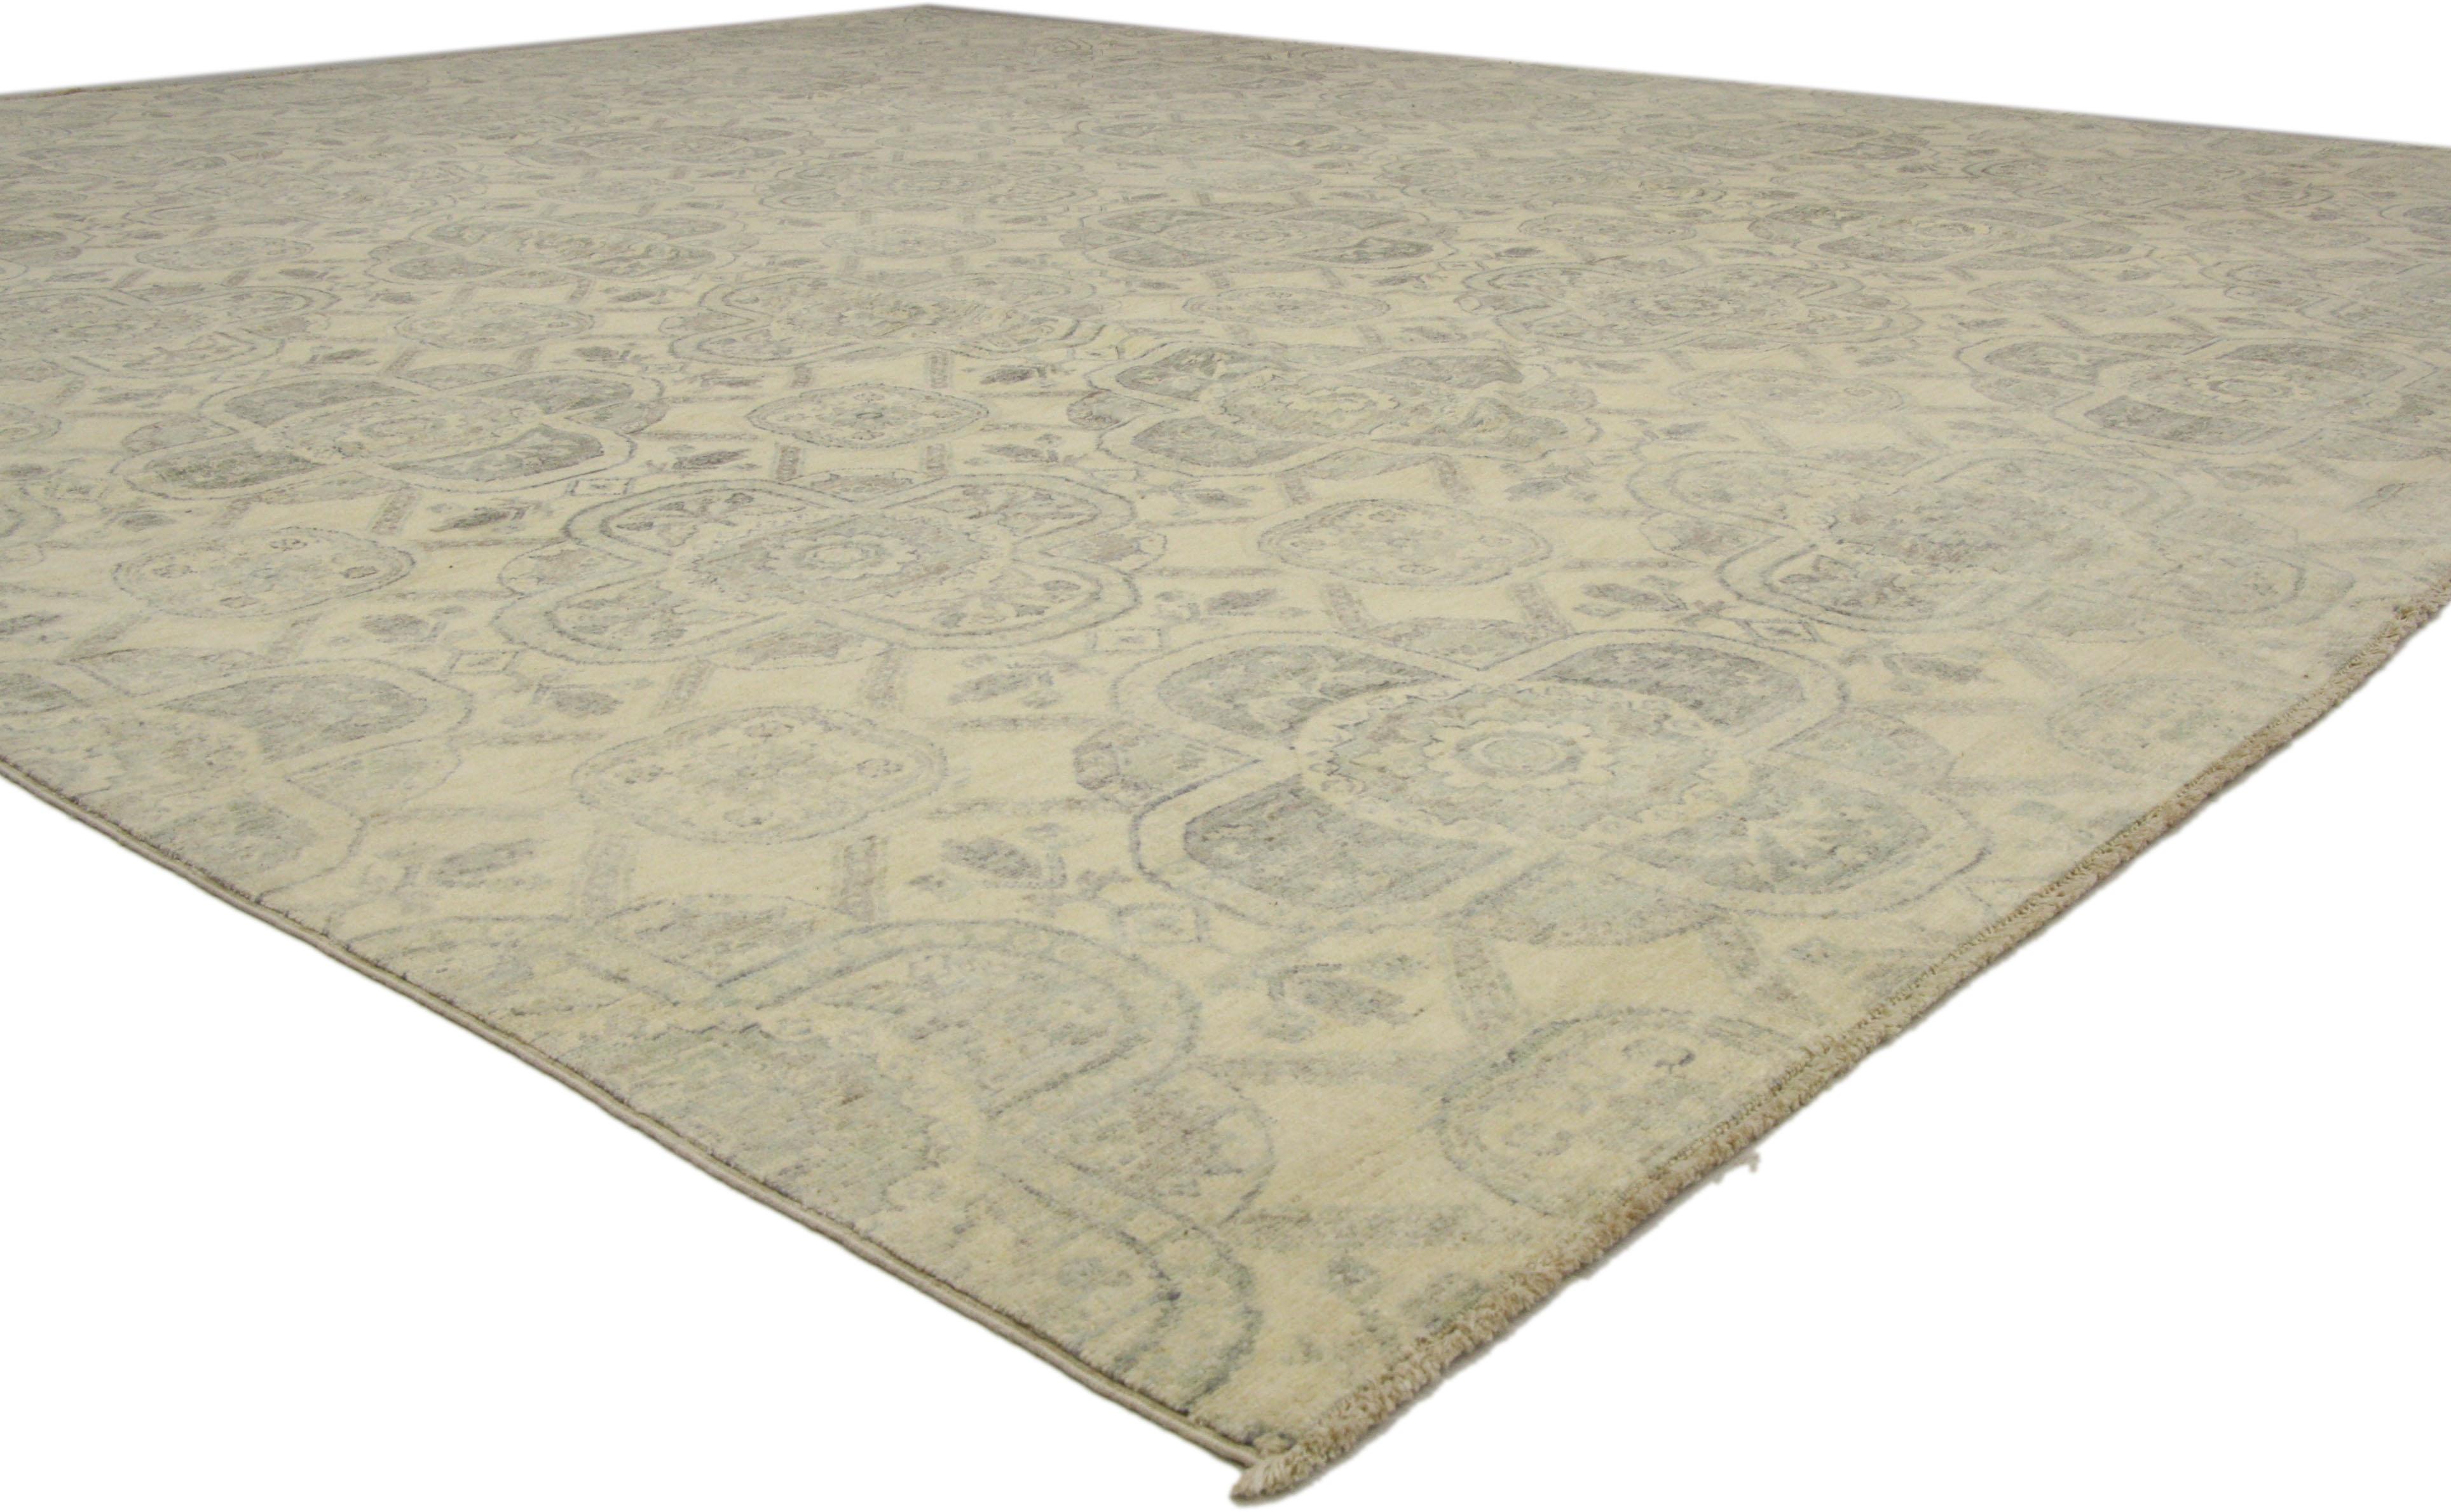 80222, new Transitional style area rug with geometric pattern. Brighten and beautify nearly any space with this hand-knotted wool transitional style area rug. The neutral colors and geometric pattern with its relatively cool-earthy, airy and